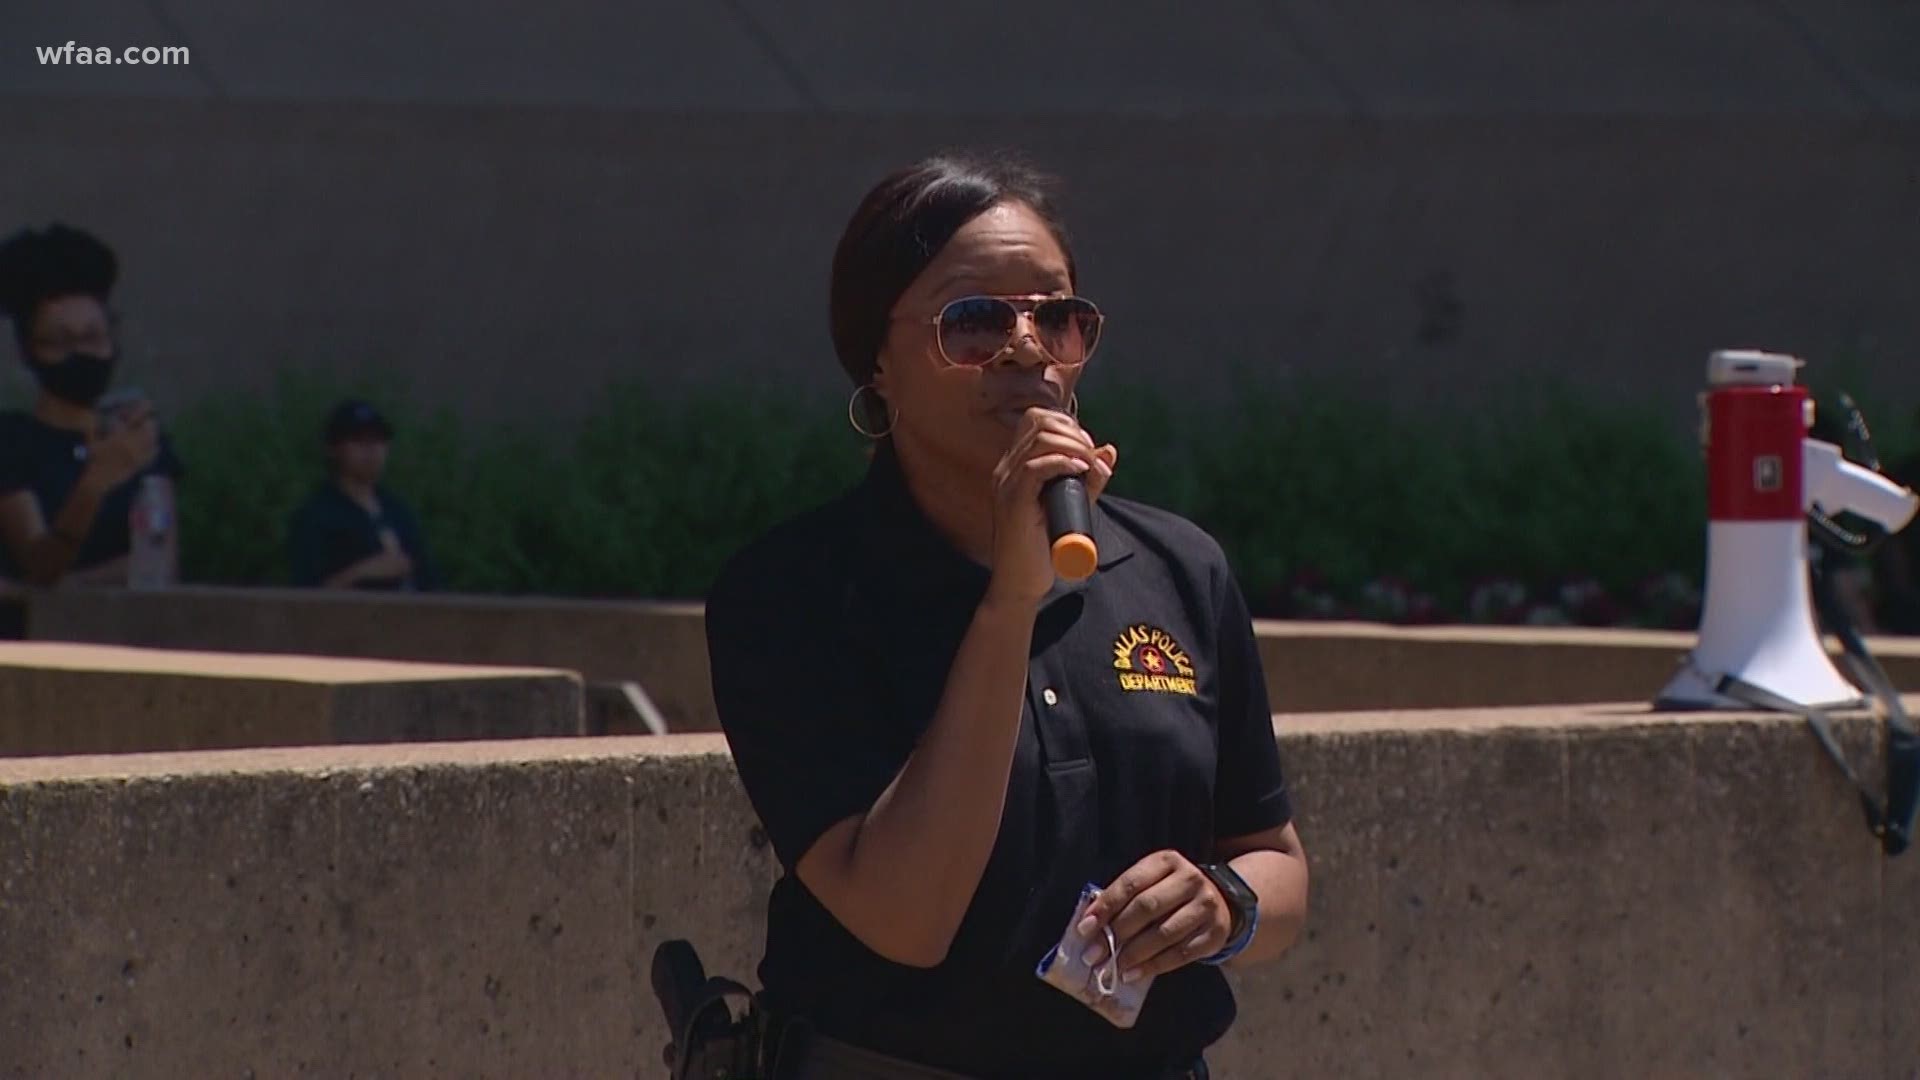 "We have to be able to work alongside one another. Work has to be done. And we need to come together to get it done," Dallas Police Chief Renee Hall said.